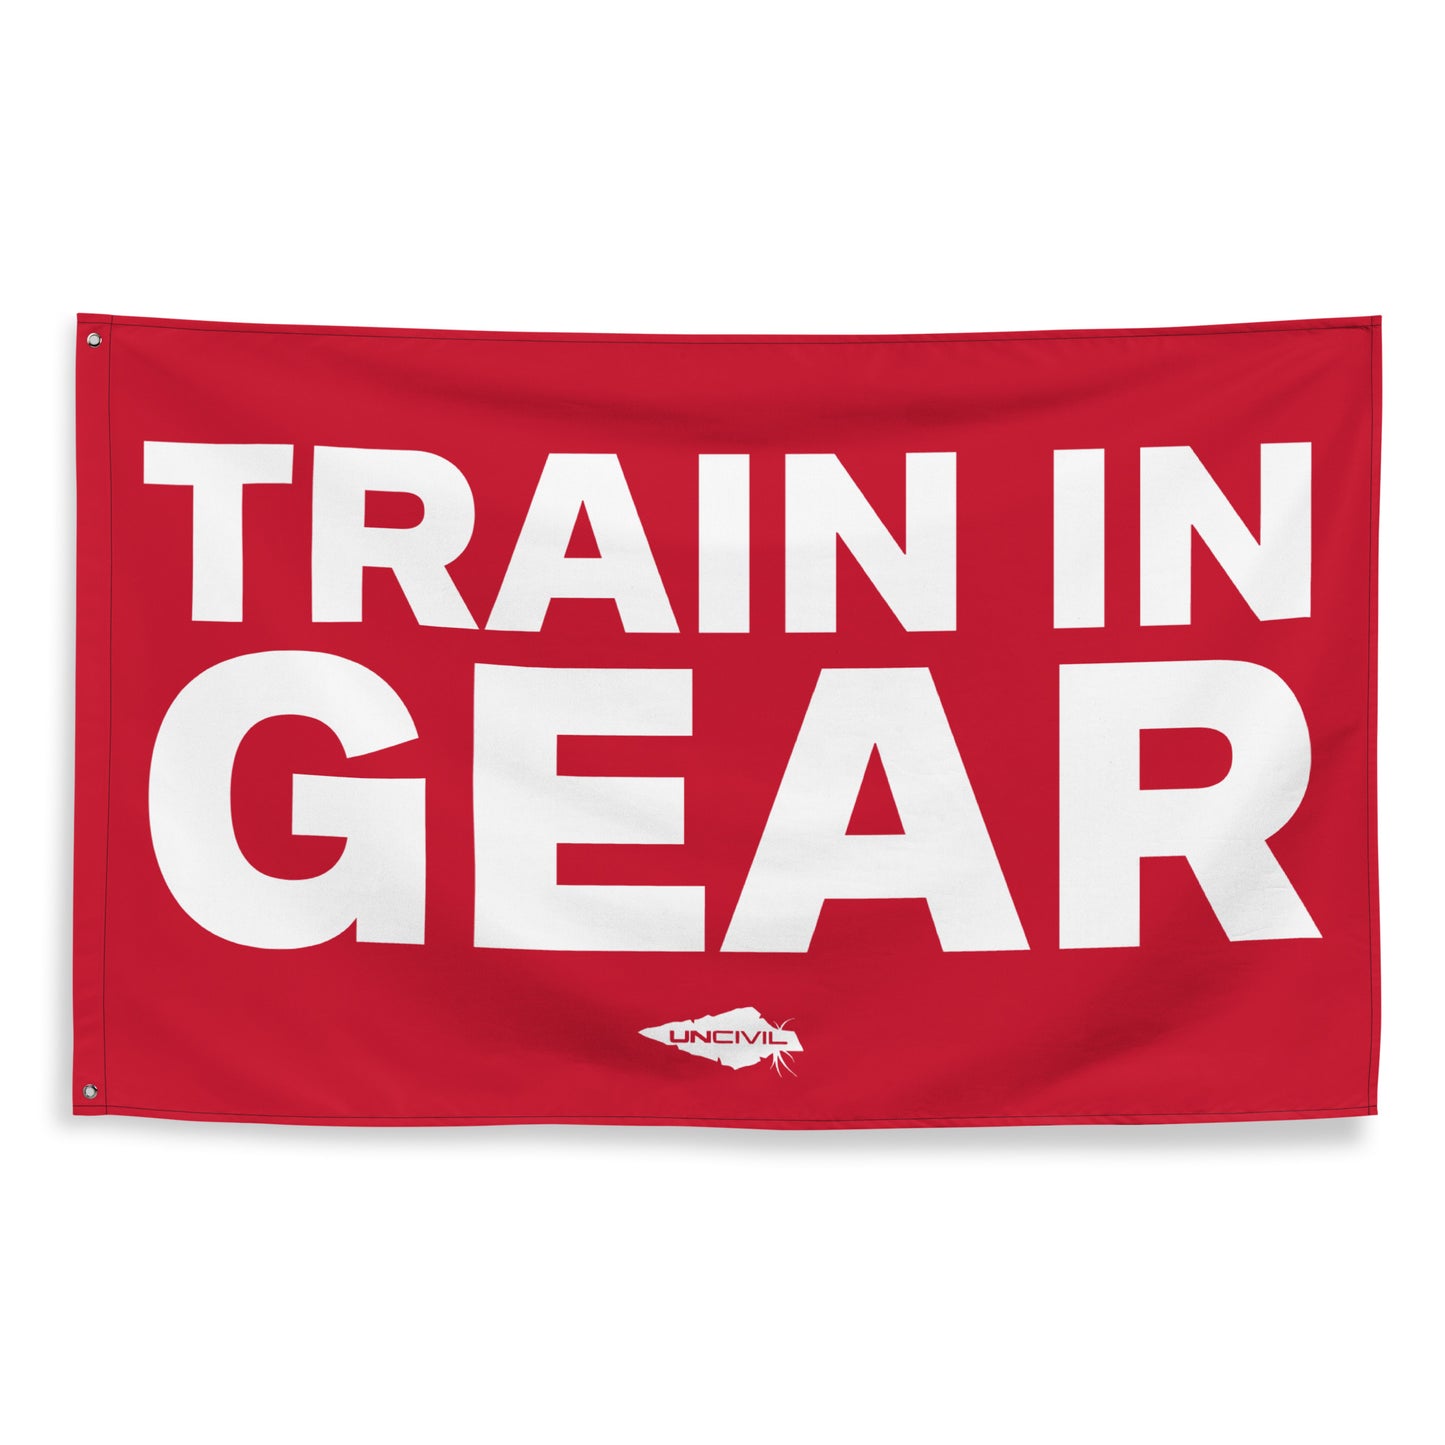 Train in Gear Flag 5x3 flag. Made for Firefighters, military, and first responders. Red and White flag with the UNCIVIL spear.